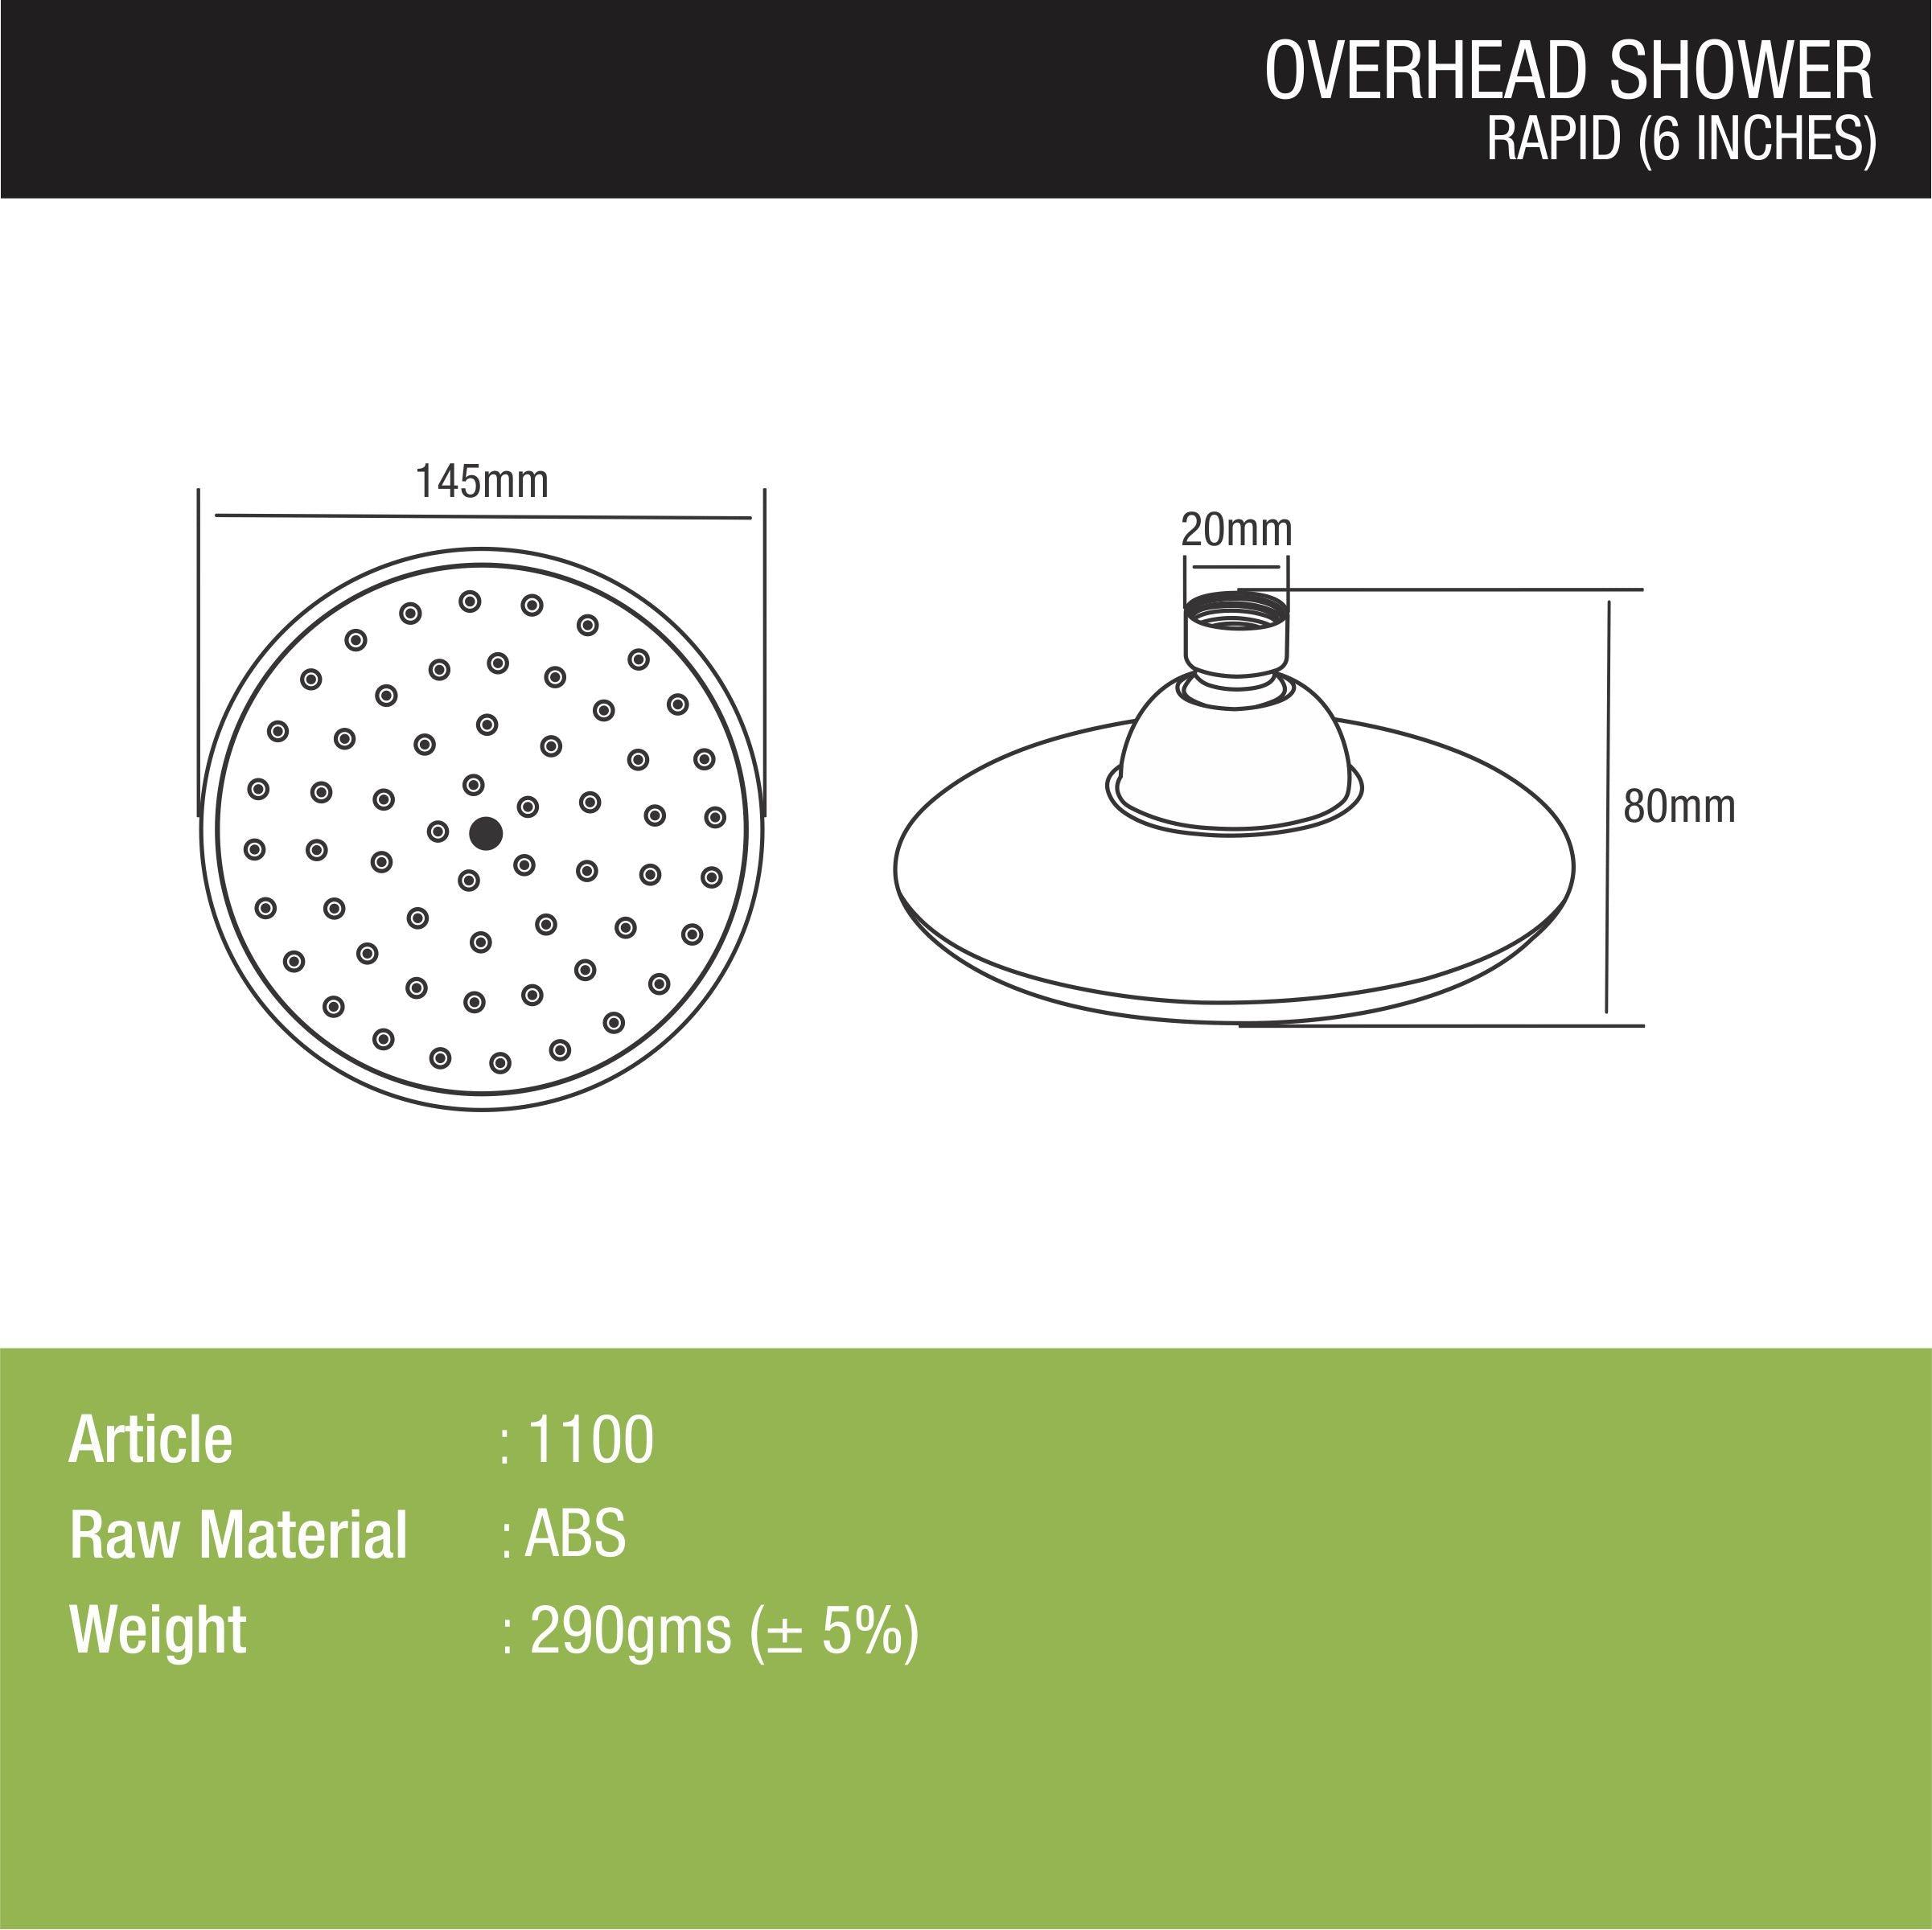 Rapid Overhead Shower (6 Inches) dimensions and sizes